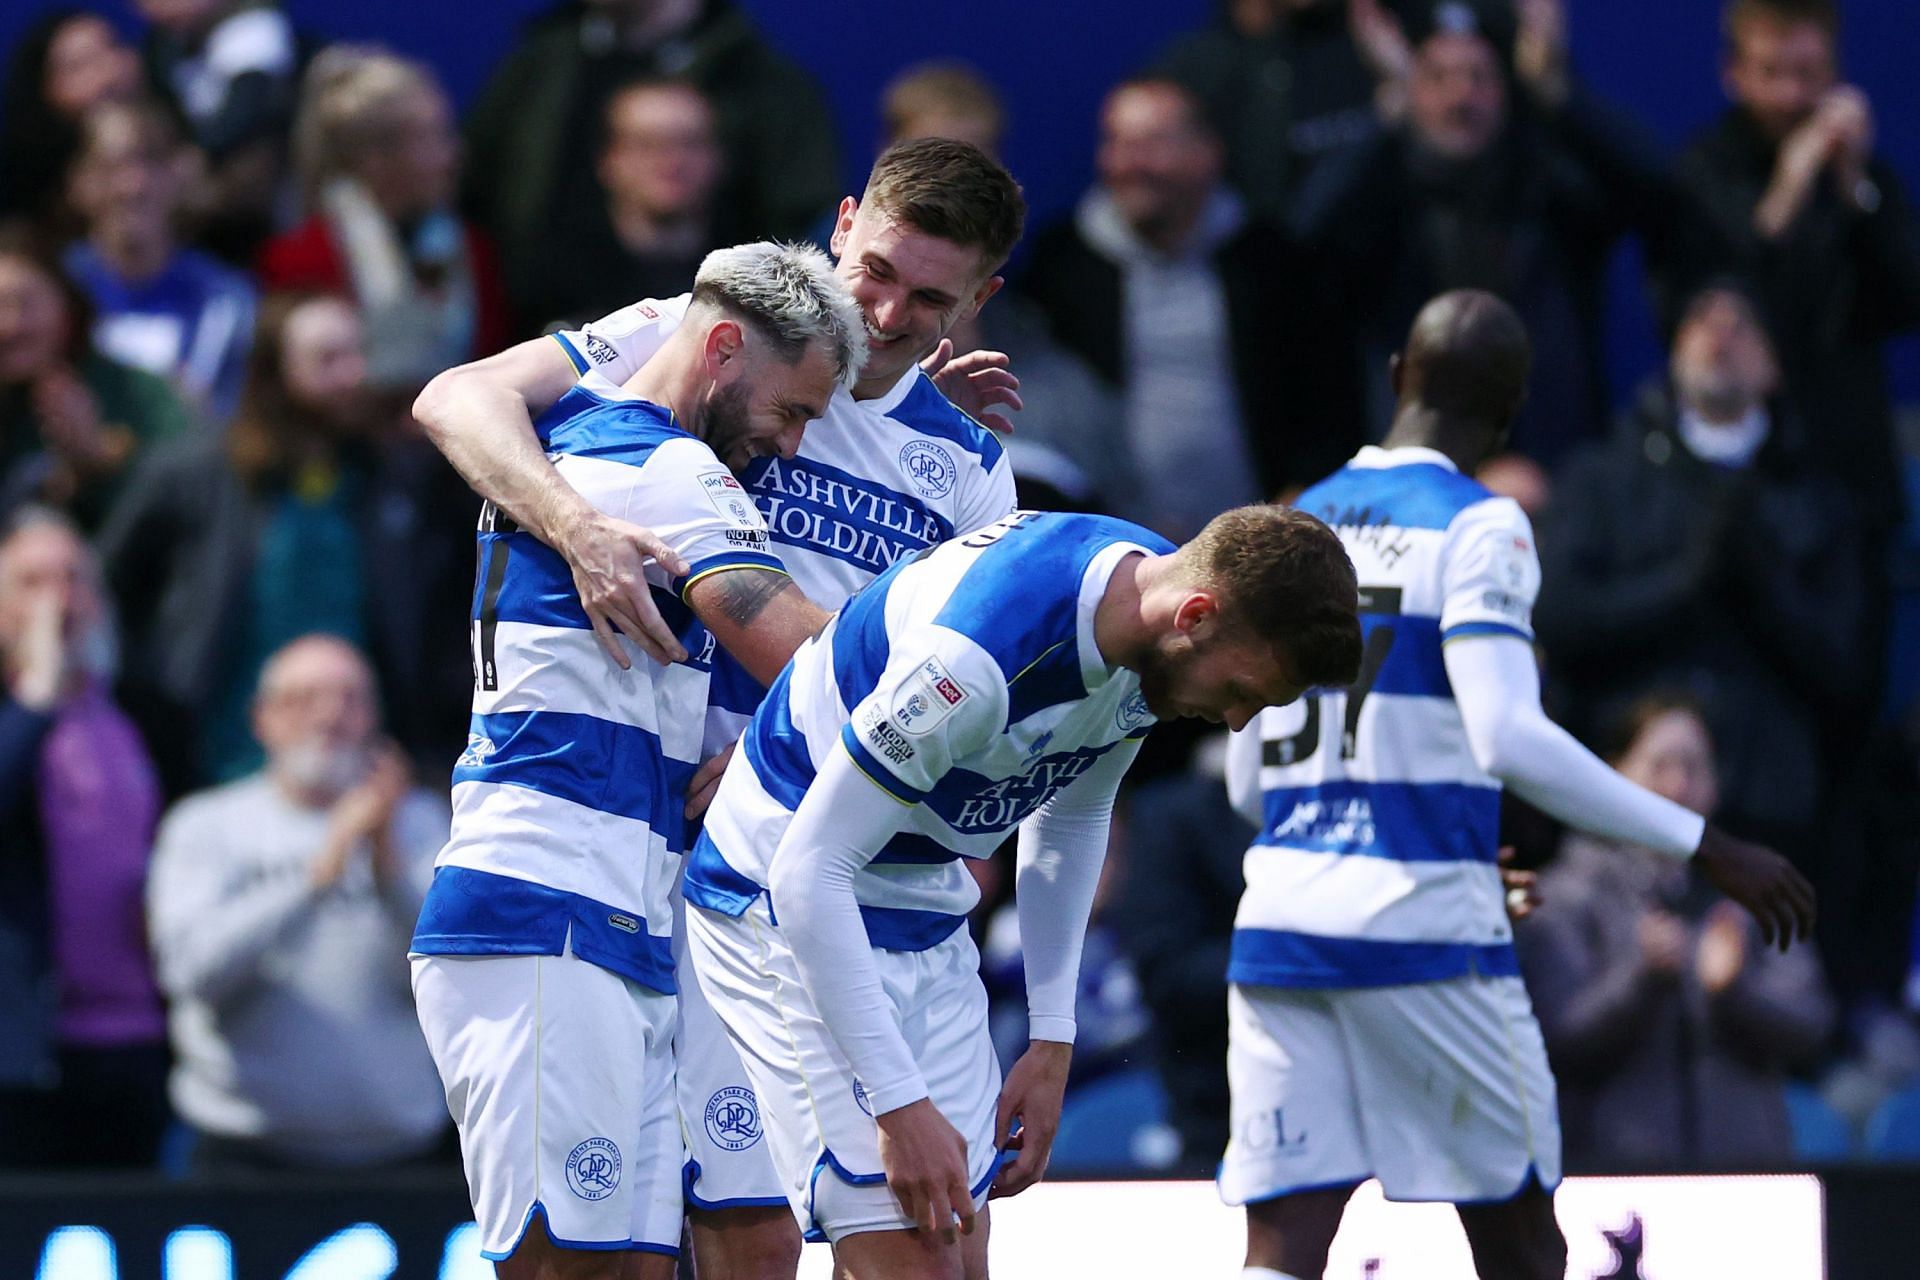 QPR will be looking for the win on Saturday